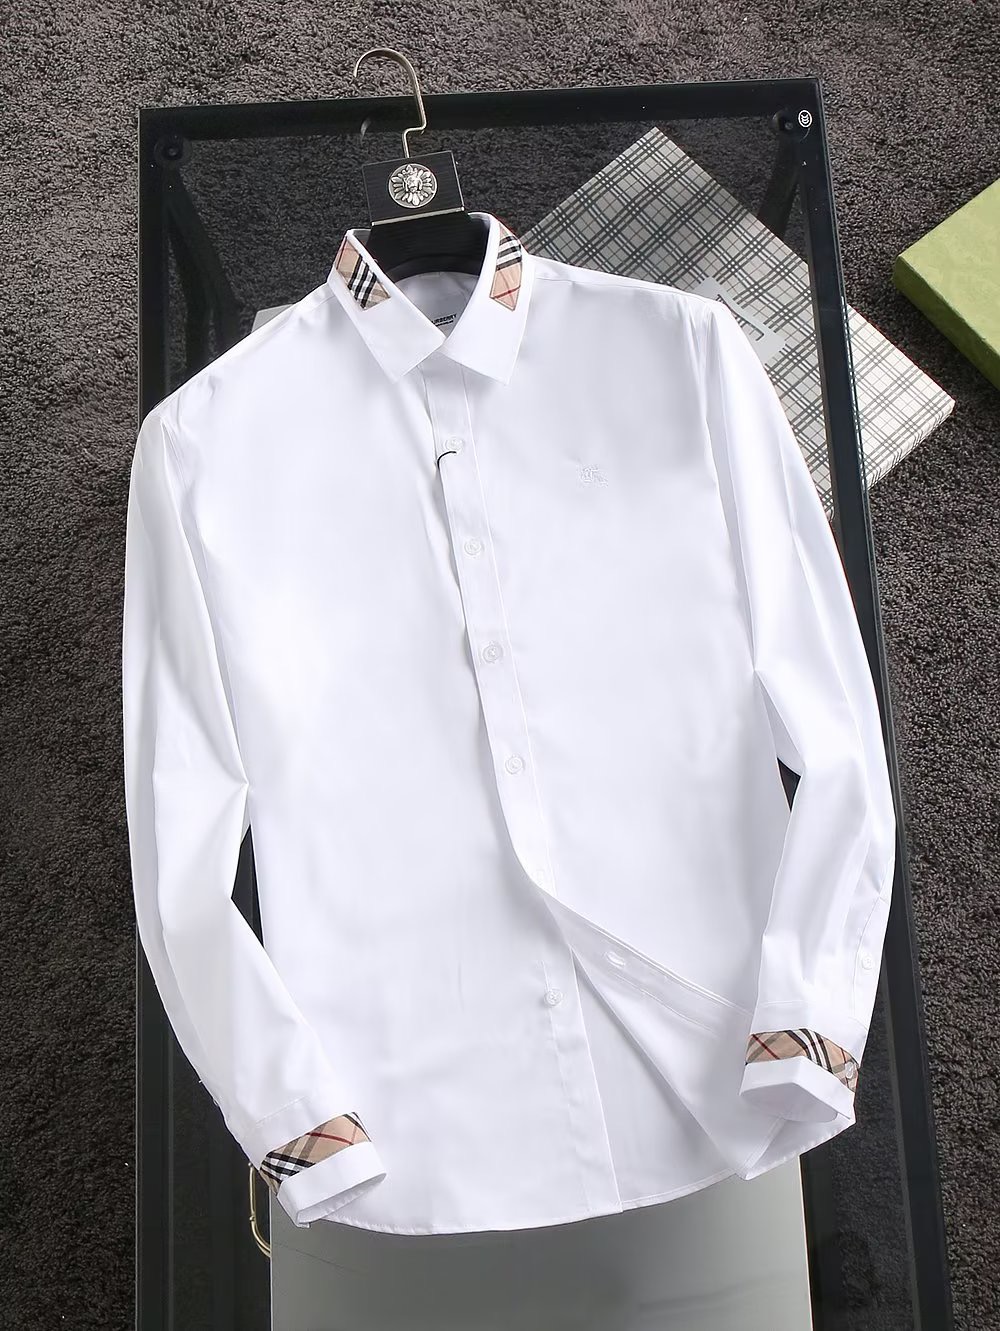 Burberry Long Sleeve Shirts For Men # 263227, cheap Burberry Shirts, only $34!